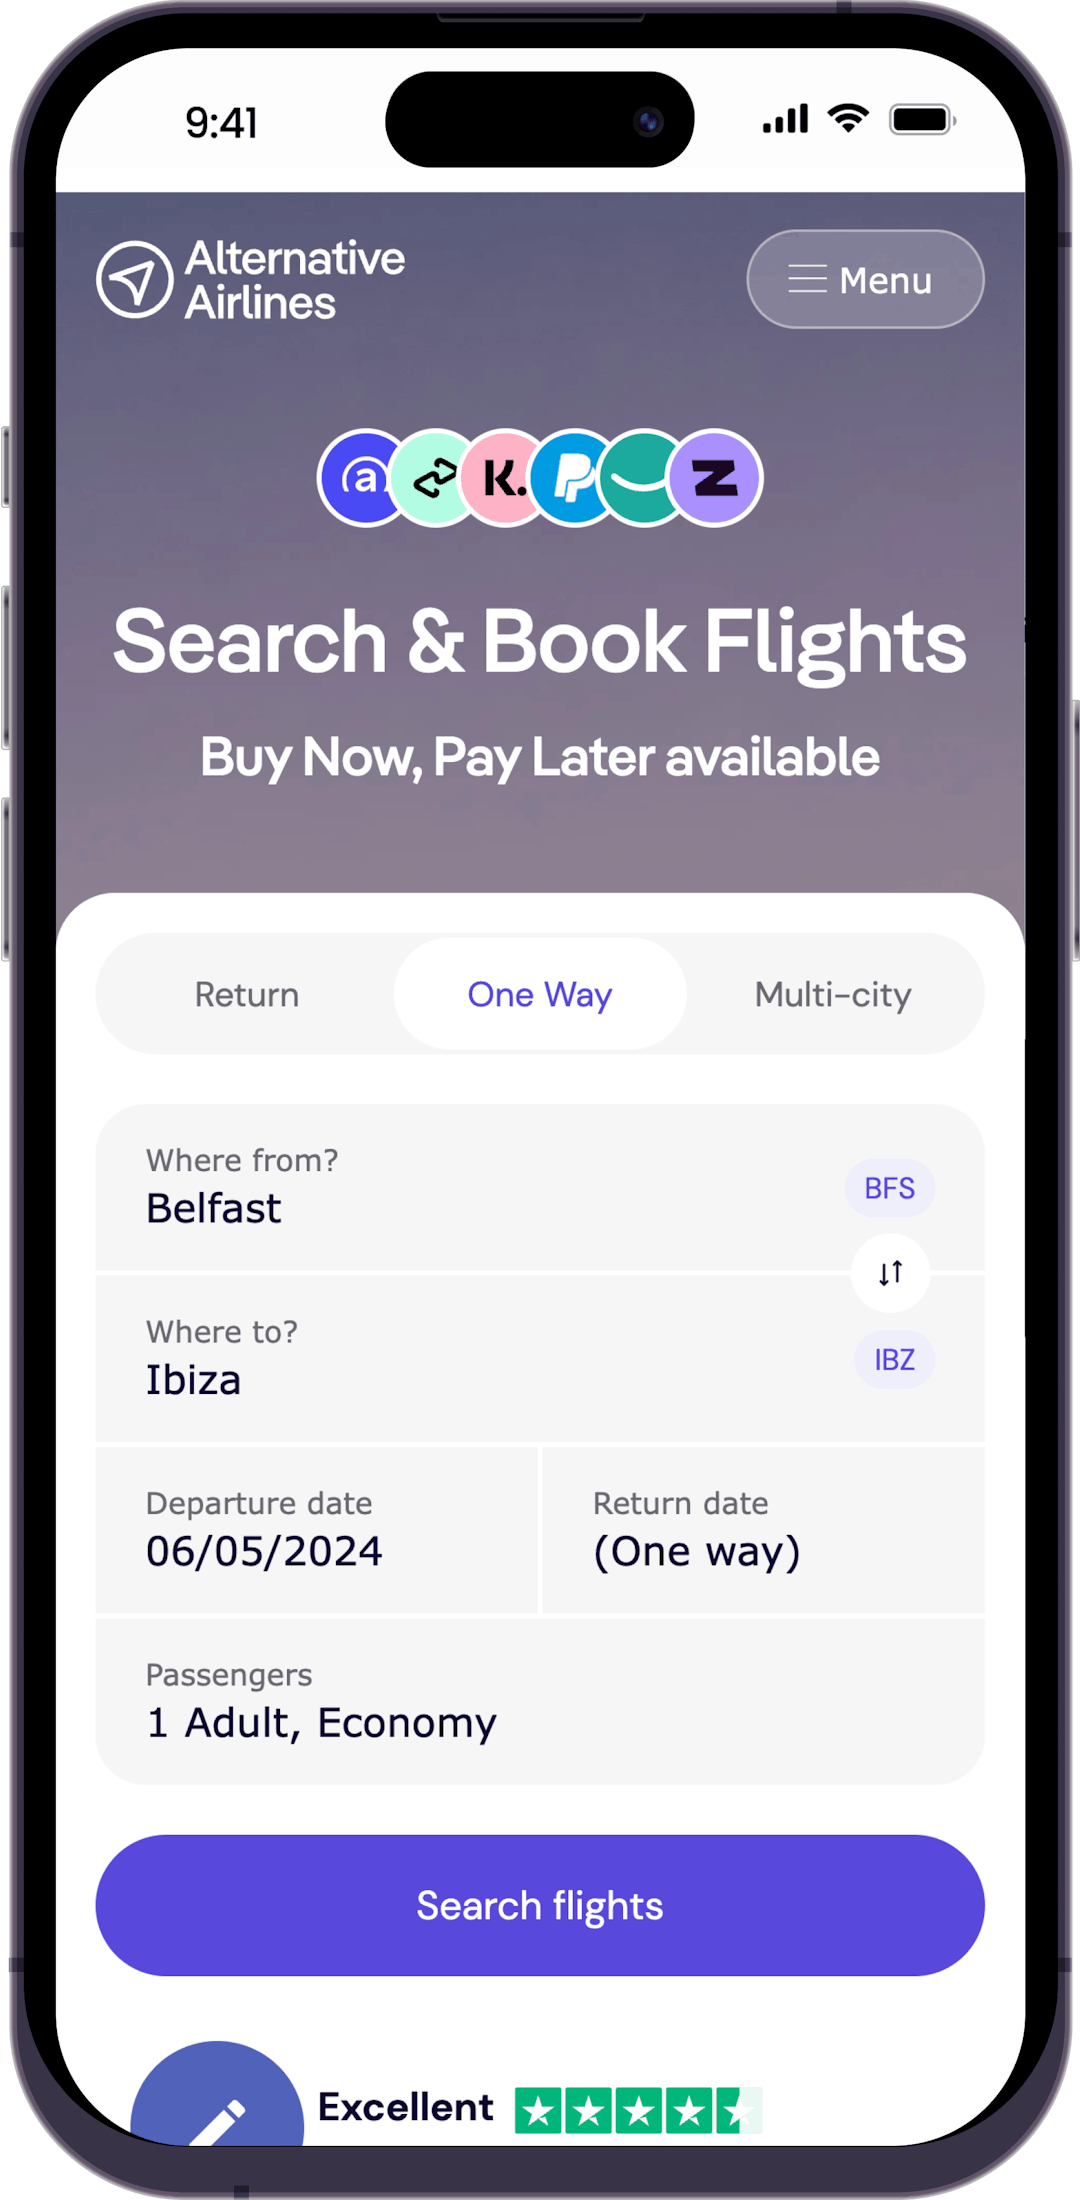 Step 1 - Search for flights